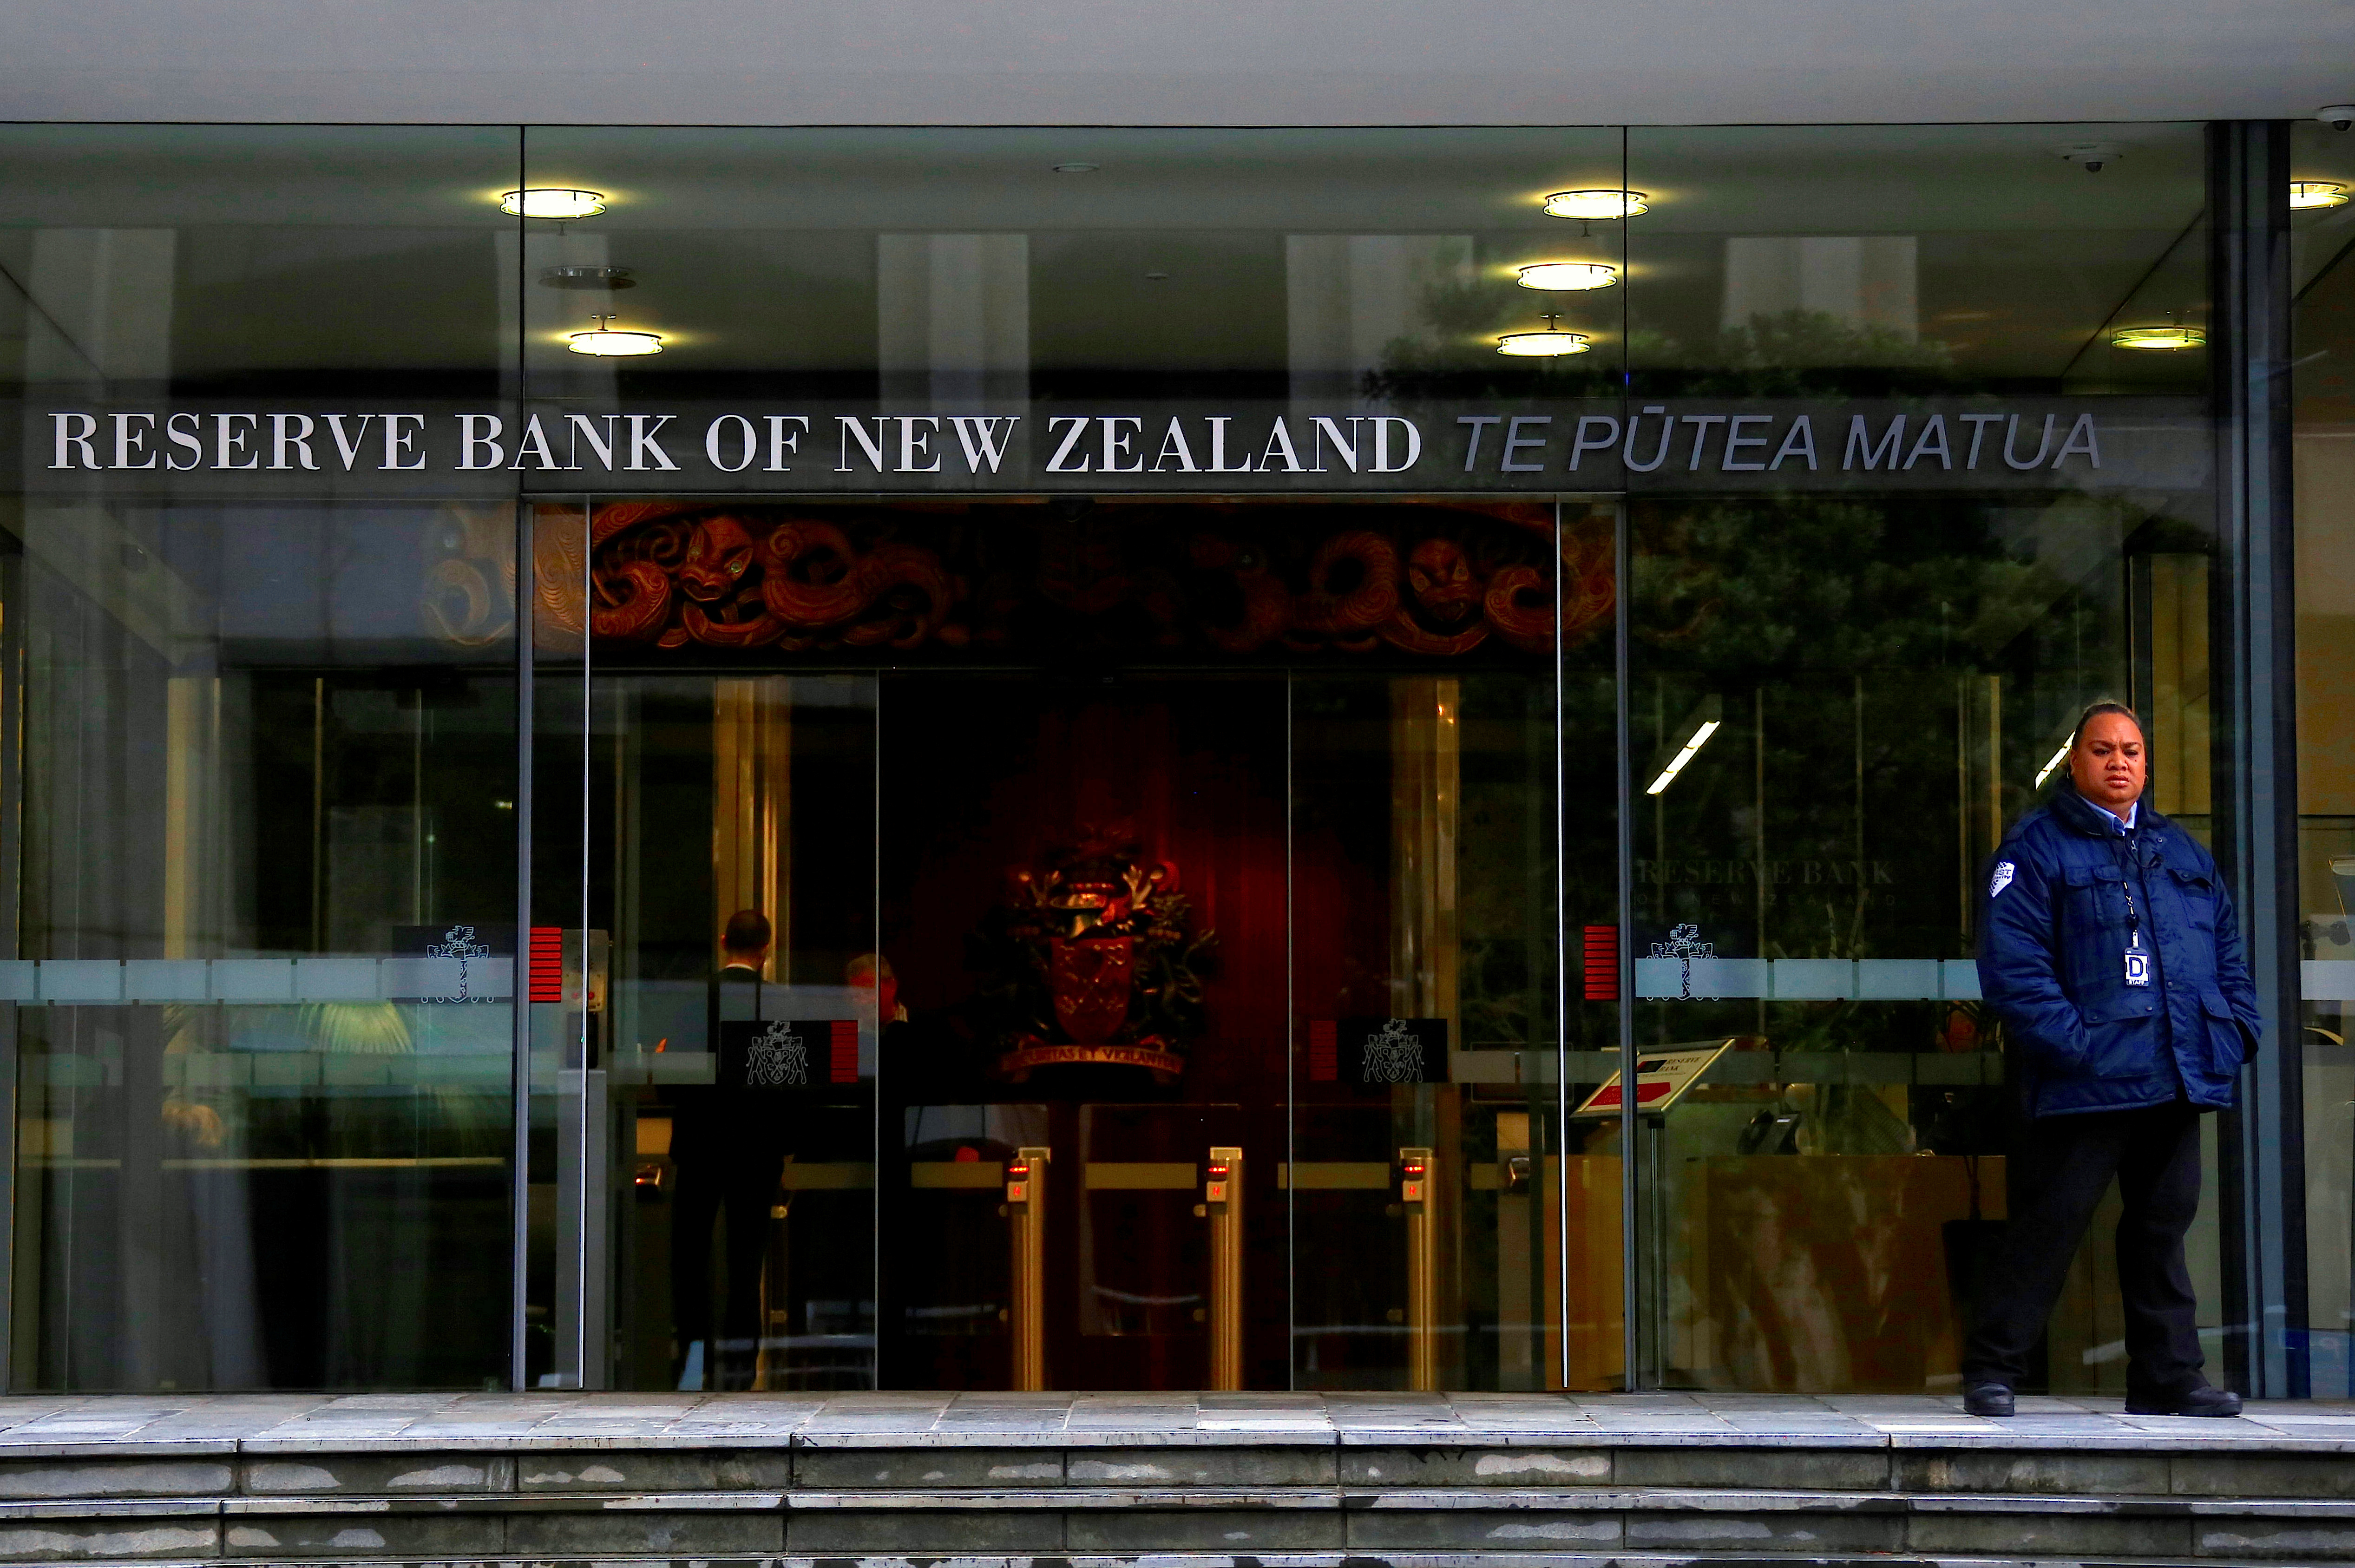 A security guard stands outside the main entrance to the Reserve Bank of New Zealand located in central Wellington, New Zealand